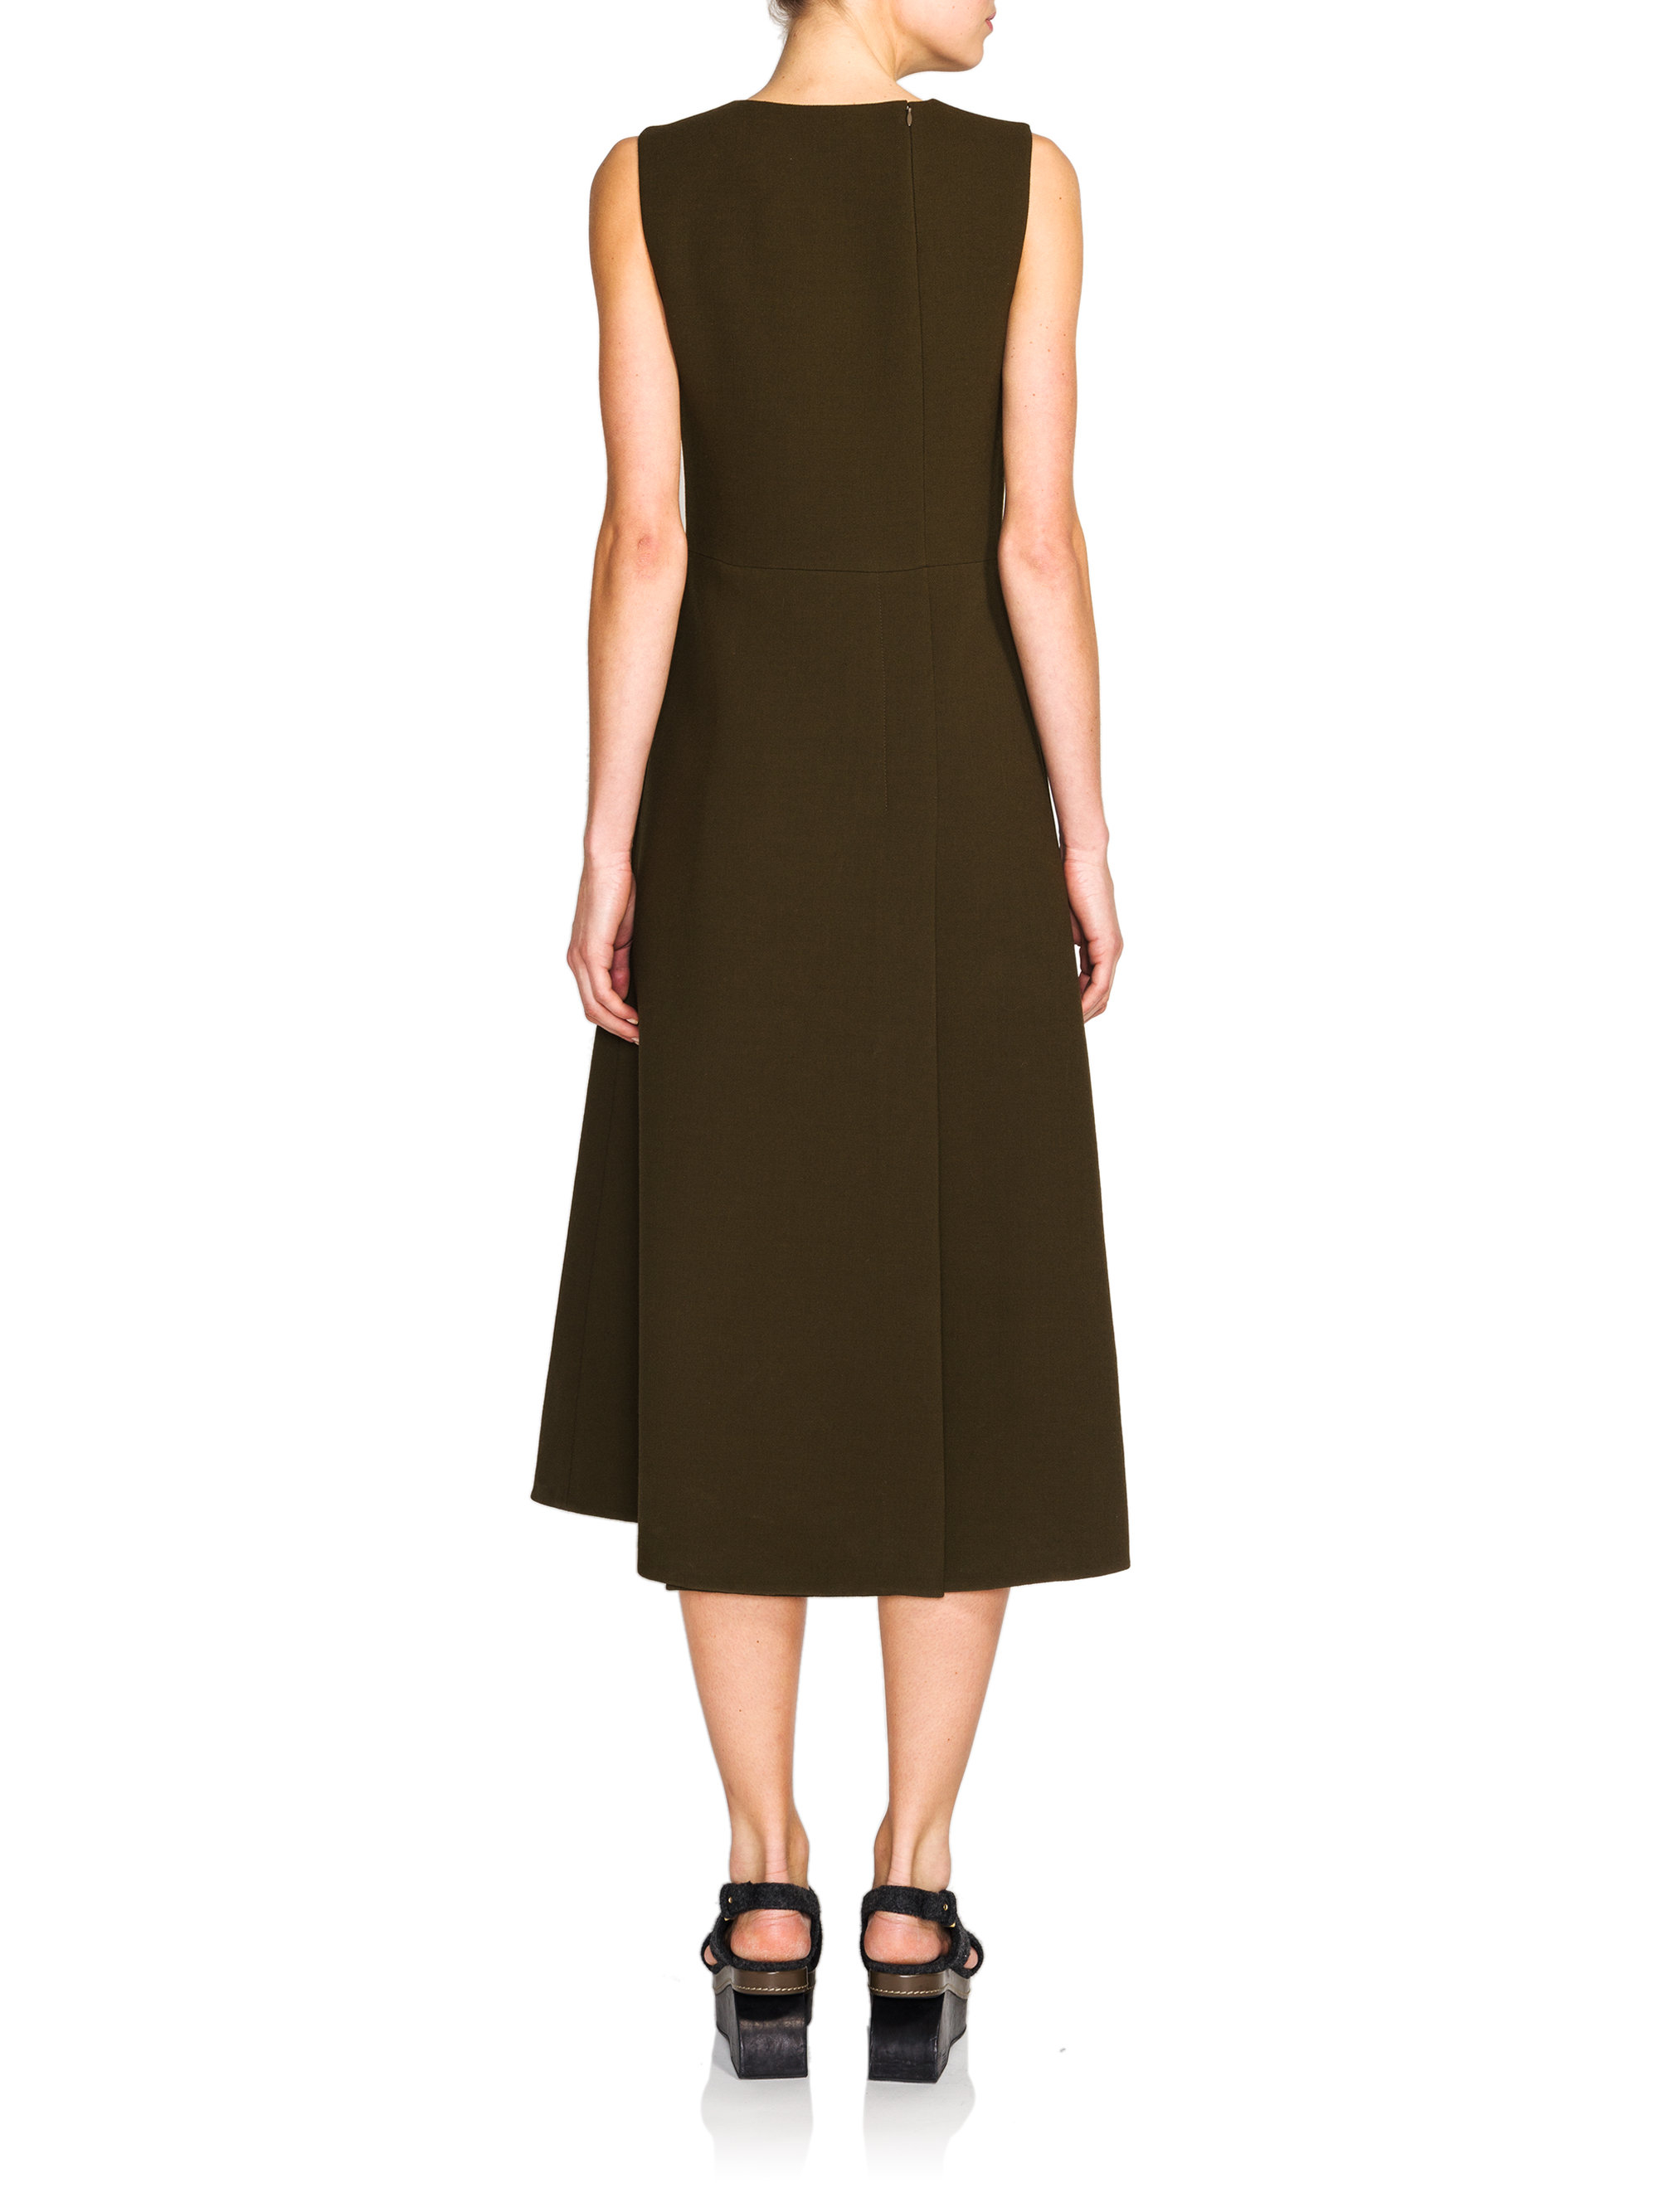 Lyst - Marni Wool Crepe A-line Dress in Brown